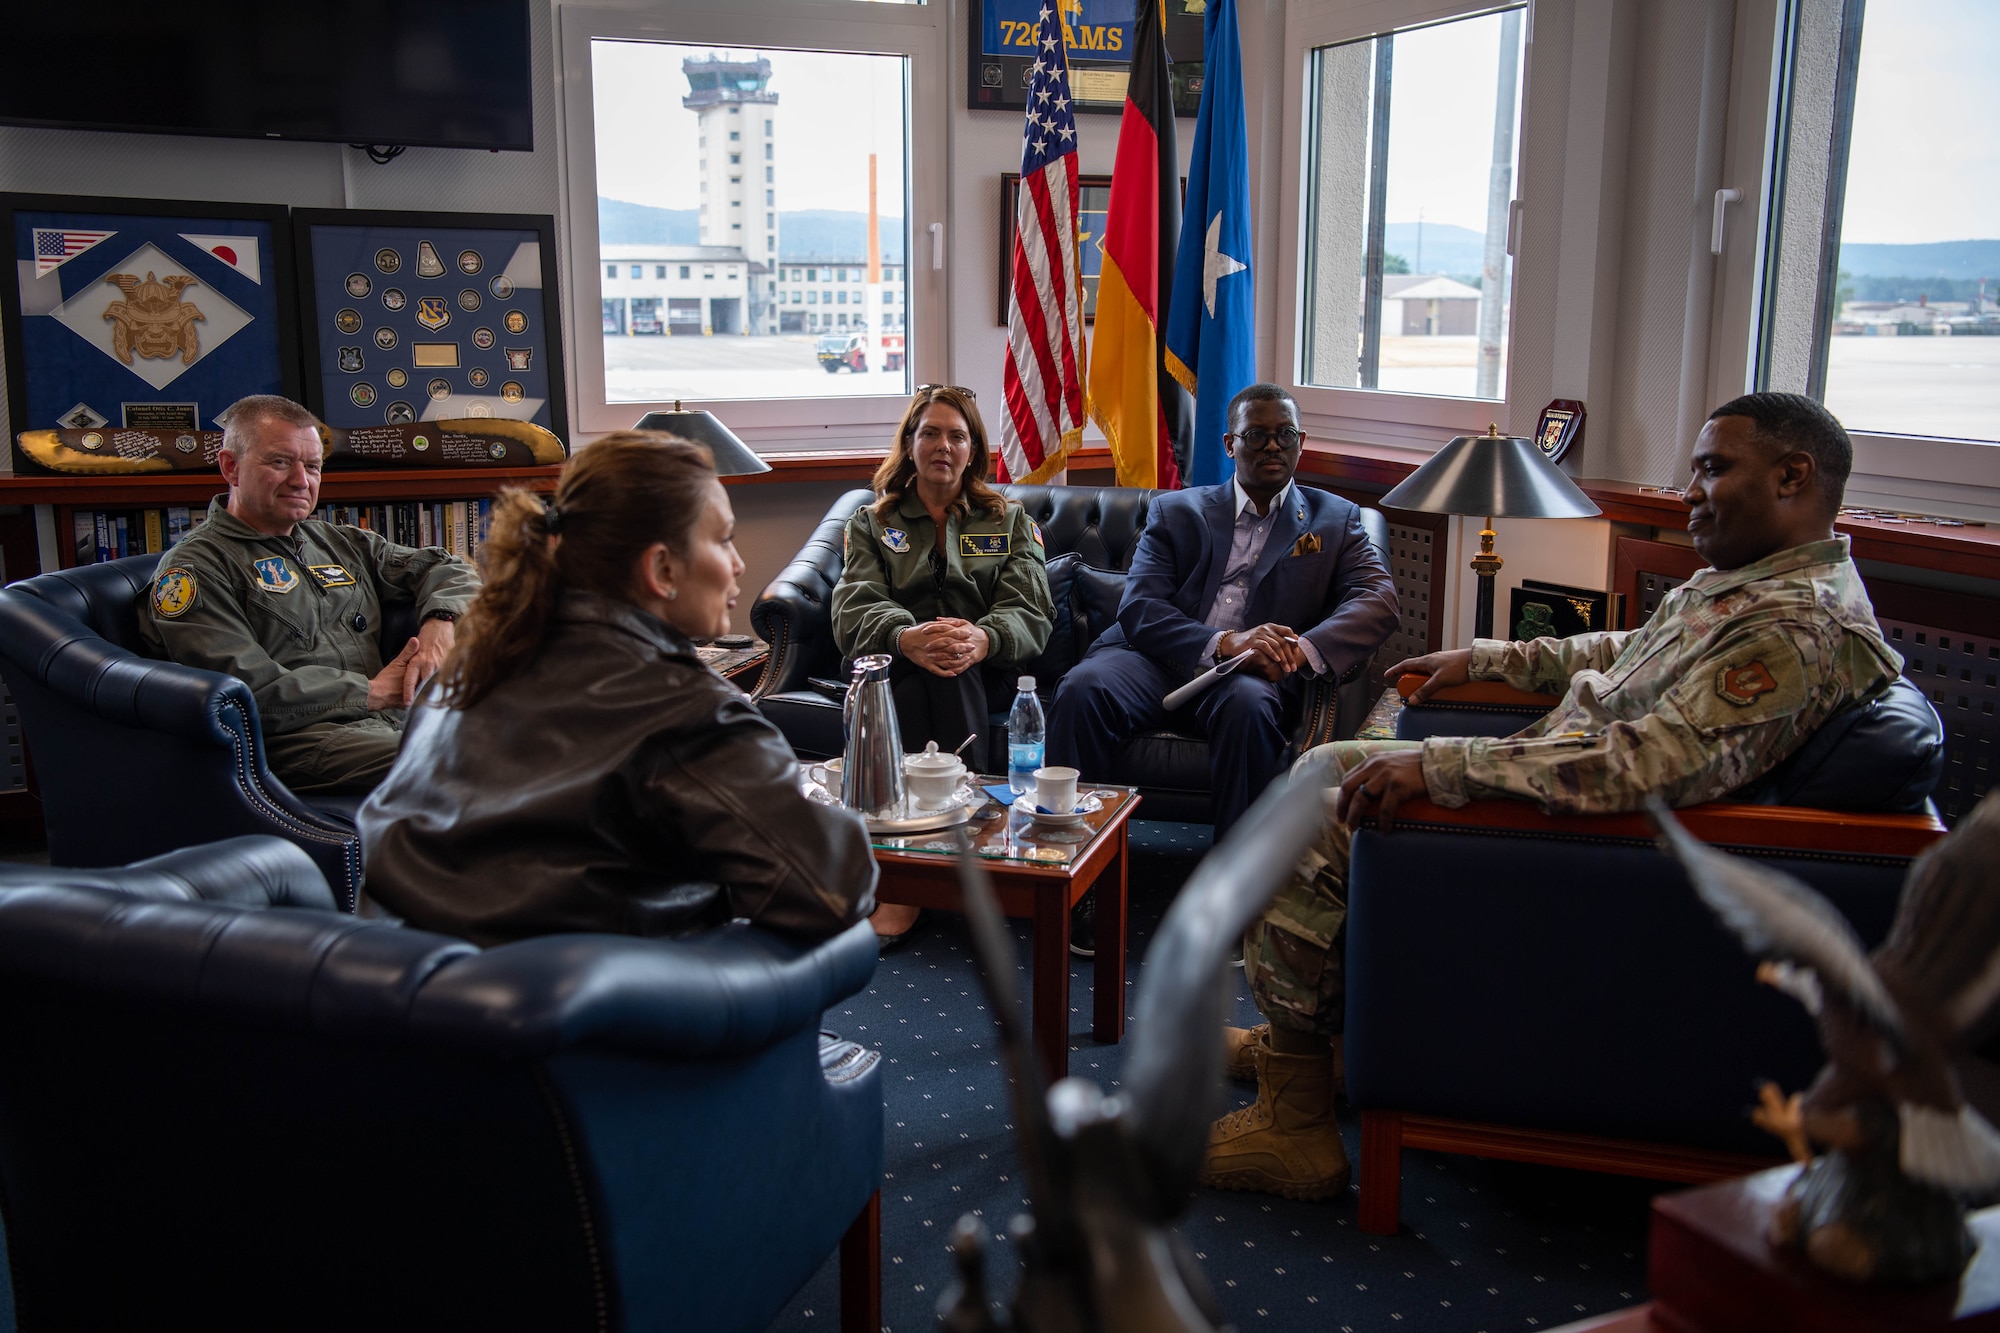 U.S. Air Force Brig. Gen. Ottis C. Jones, 86th Airlift Wing commander, front right, speaks with Michigan Gov. Gretchen Whitmer, front left, Brig. Gen. Rolf Mammen, 127th Wing Commander of Selfridge Air National Guard Base, Michigan, back left, Triscia Foster, Executive Office of the Governor chief operating officer, back middle, and Quentin Messer Jr., Michigan Economic Development Corporation chief executive officer, back right, at Ramstein Air Base, Germany, June 22, 2023.